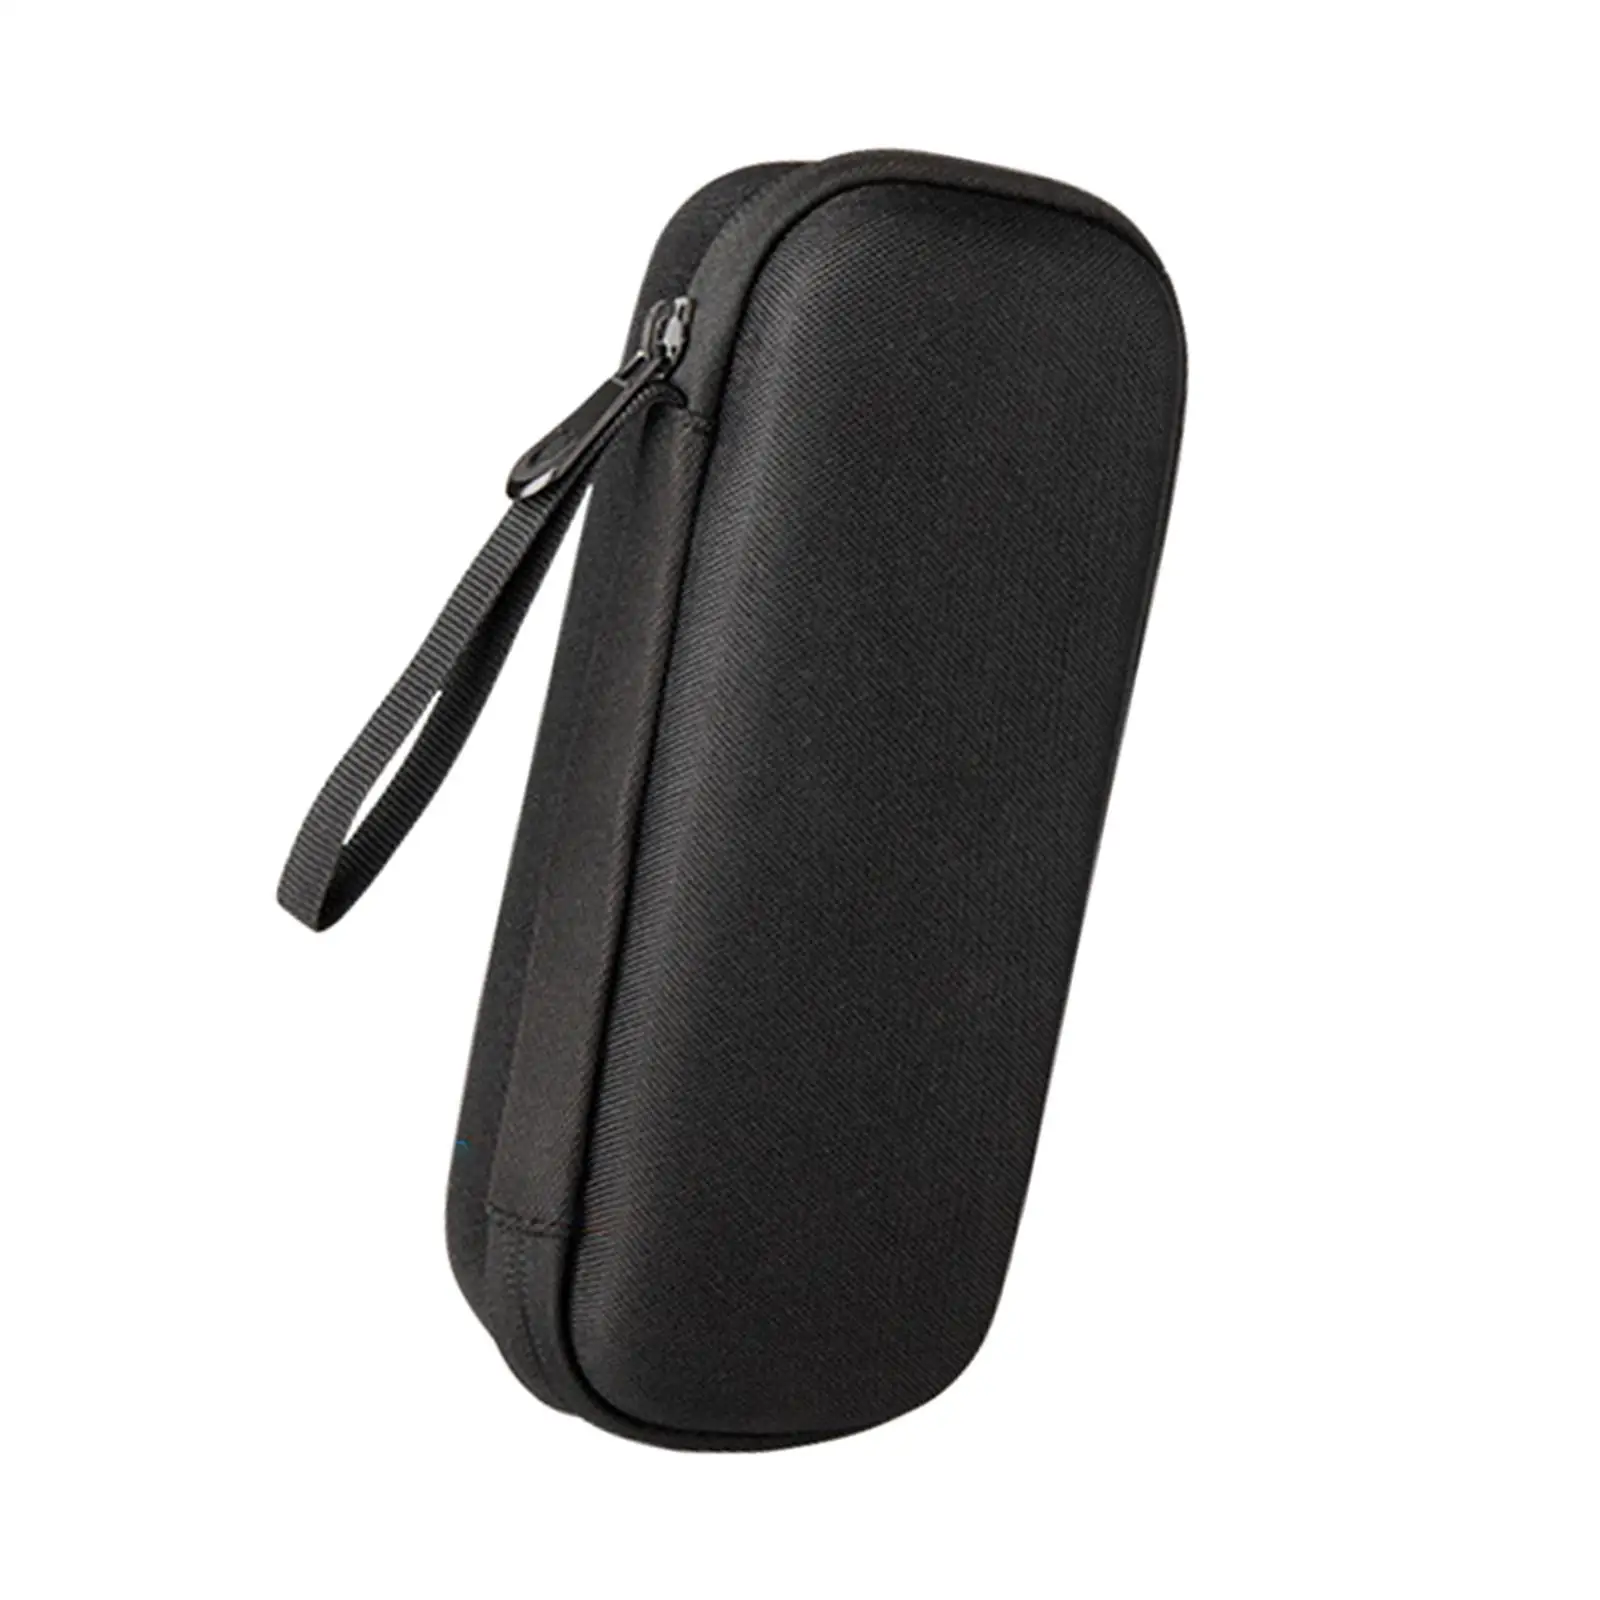 Hard Travel EVA Case Charger Carrying Case USB Cable Organizer Storage Pouch for Cord Cable Earphone Electronic Accessories